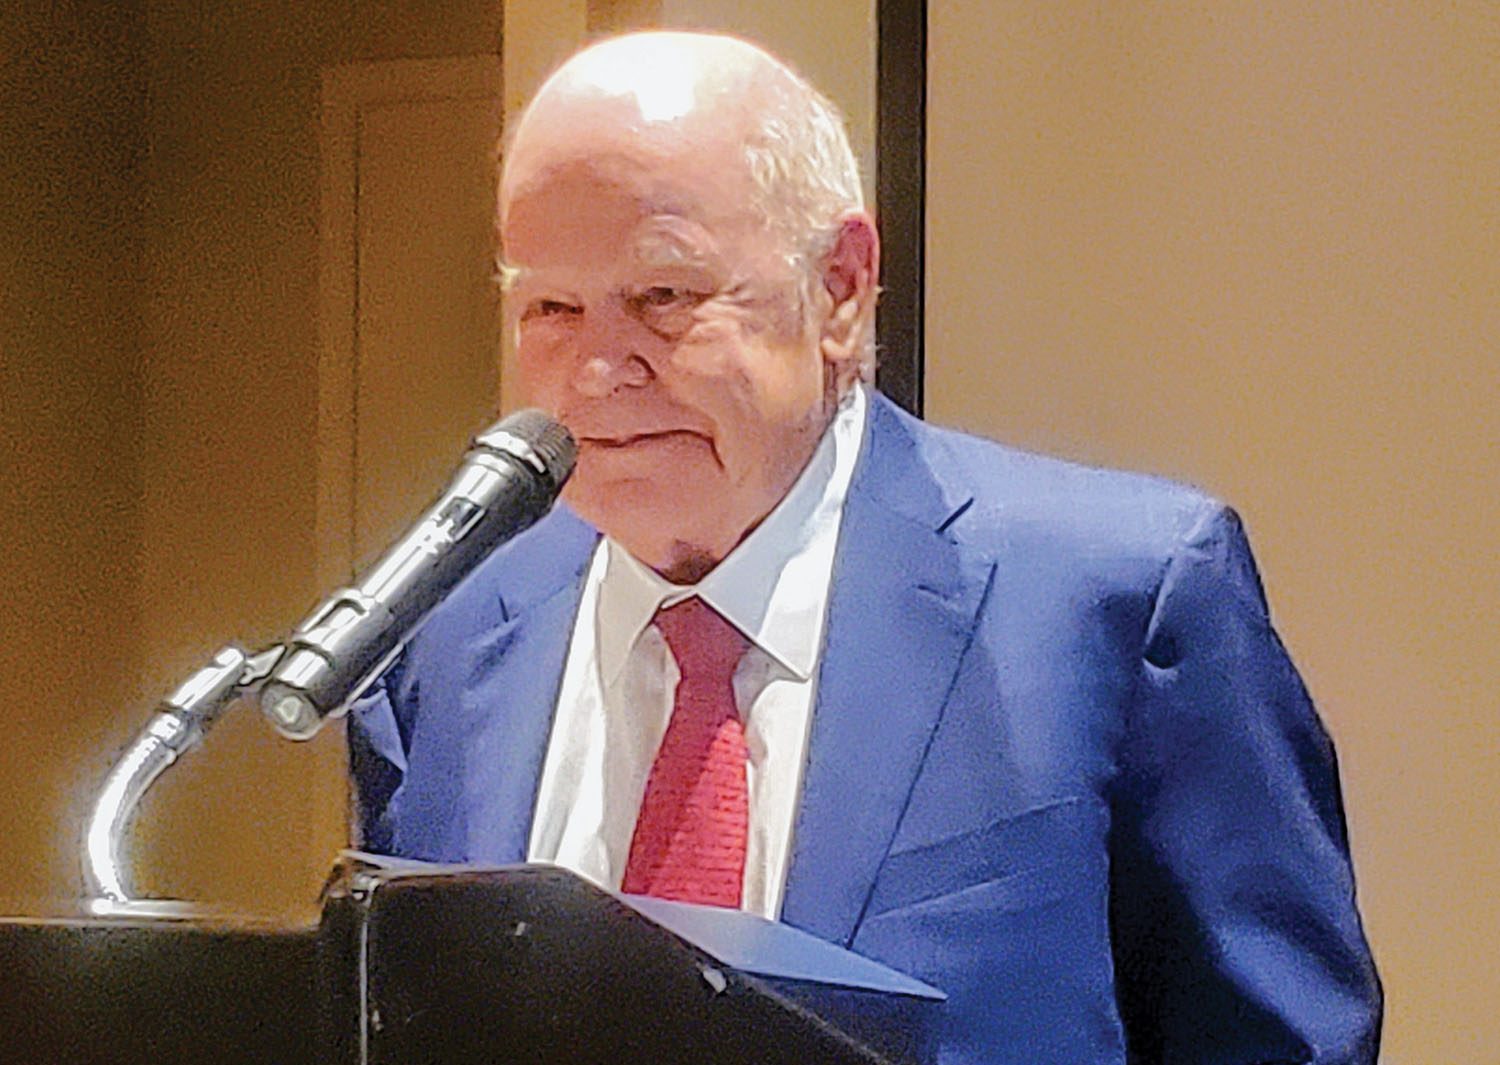 Walter Blessey Jr. accepts the Maritime Person of the Year award from the New Orleans Propeller Club. (Photo by Richard Eberhardt)